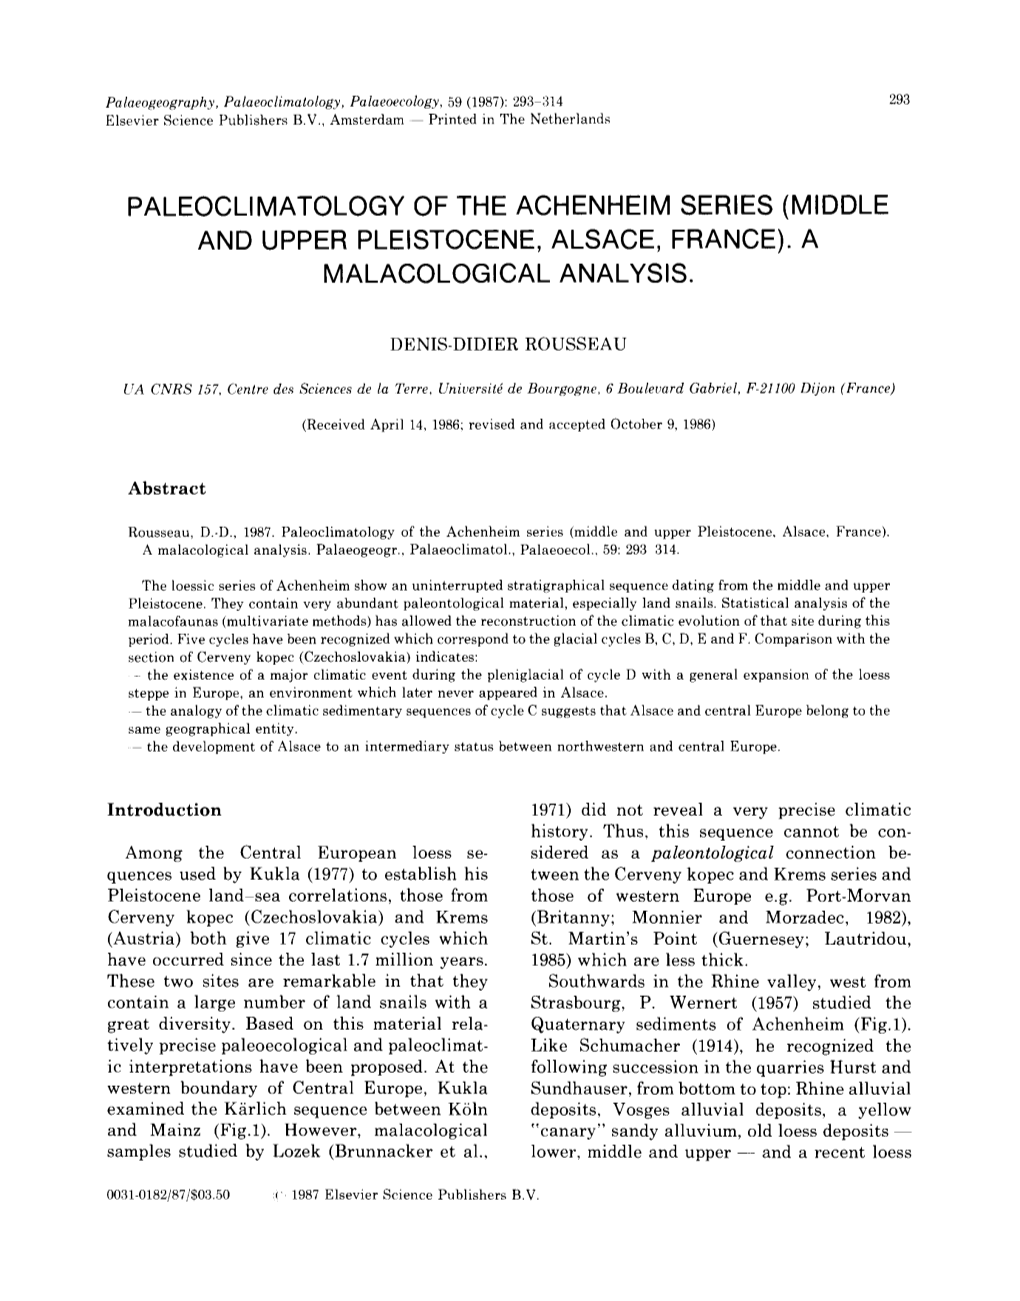 Paleoclimatology of the Achenheim Series (Middle and Upper Pleistocene, Alsace, France). a Malacological Analysis